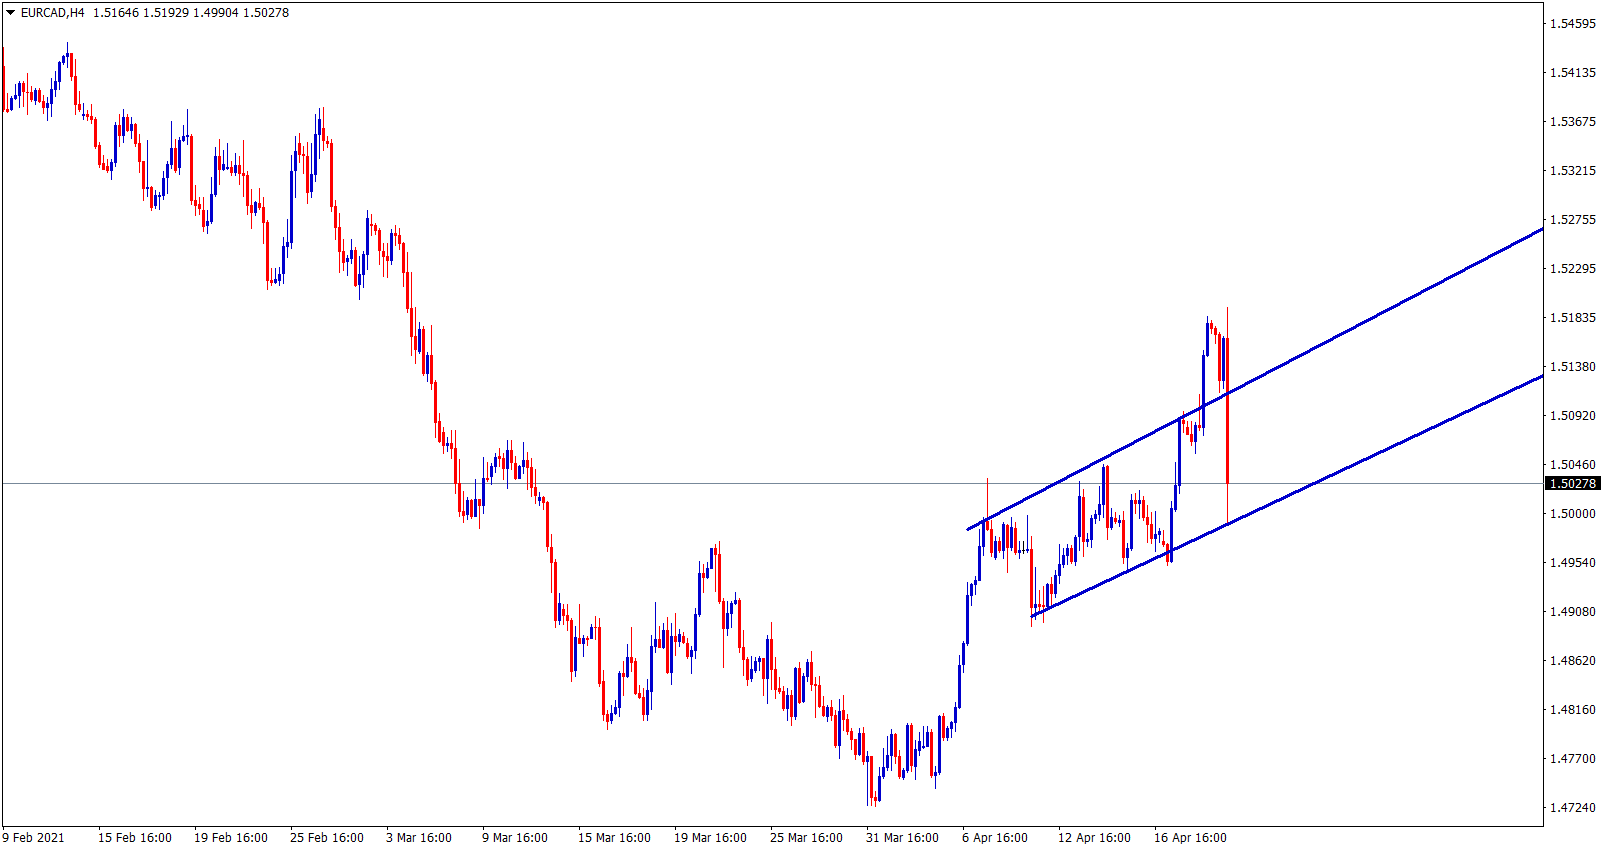 EURCAD fall to the higher low of the channel